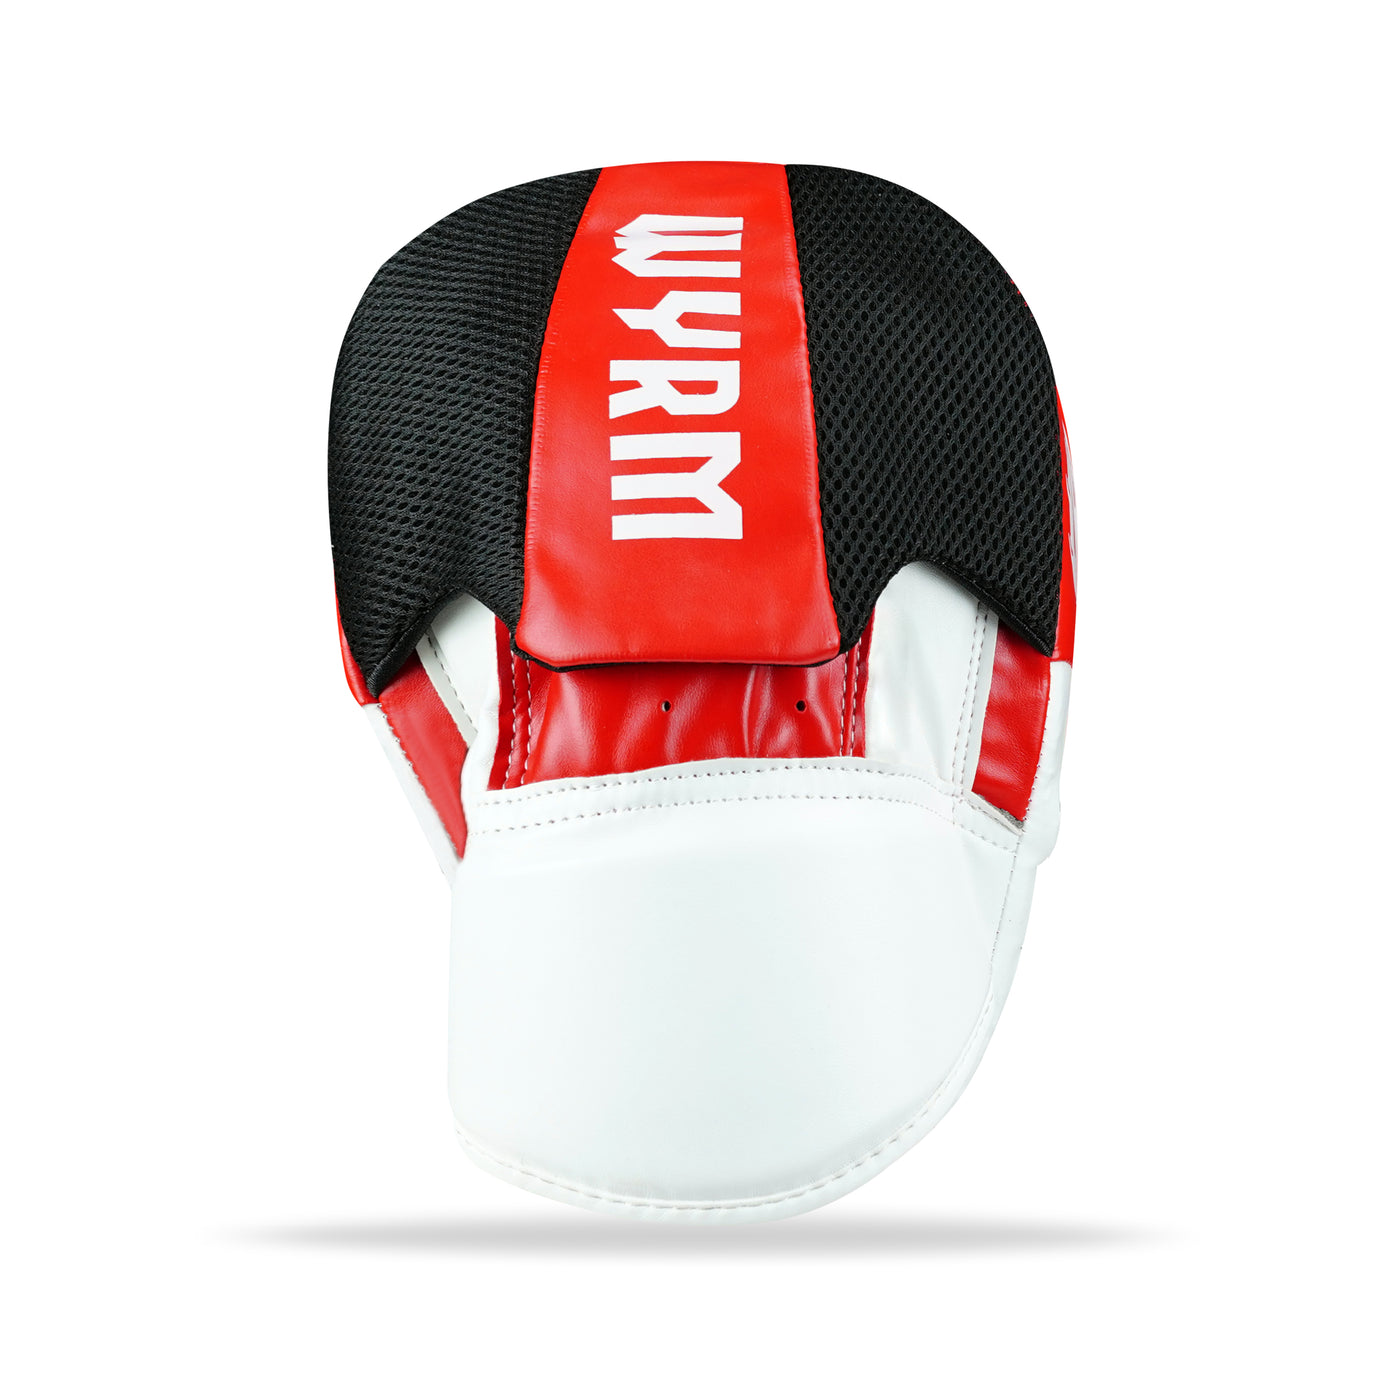 Dragon White/Red Focus Pads